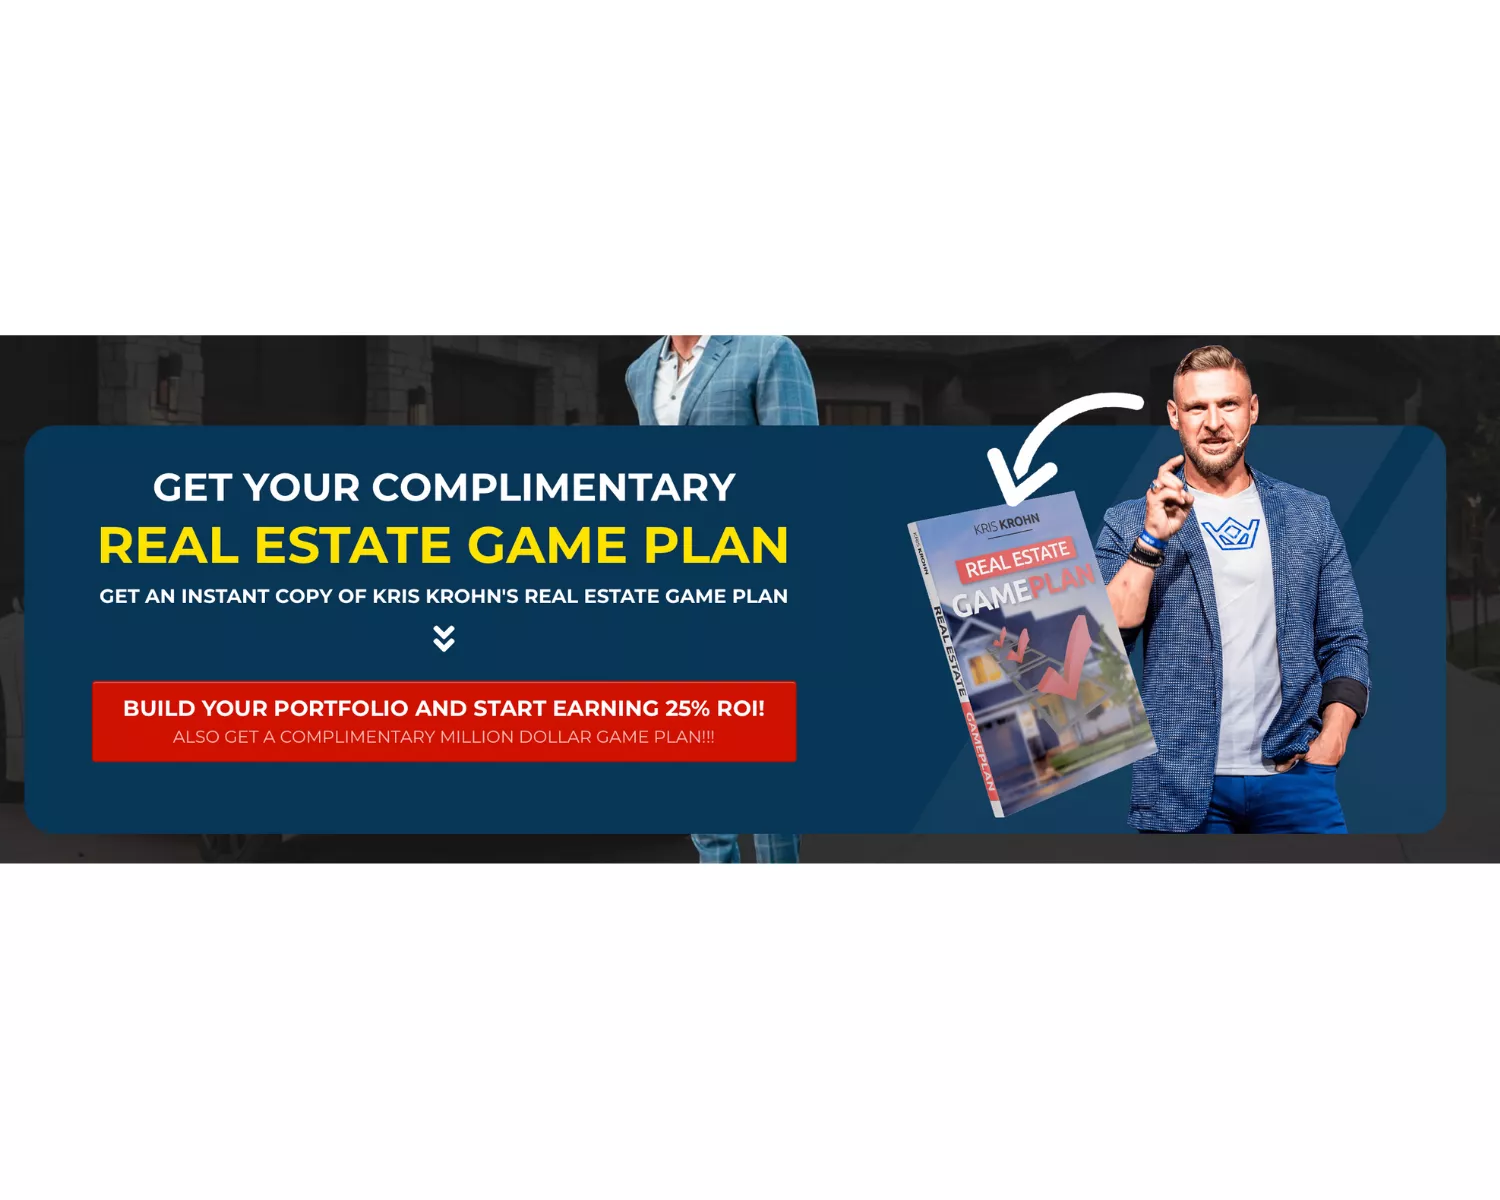 Introducing the Real Estate Game Plan